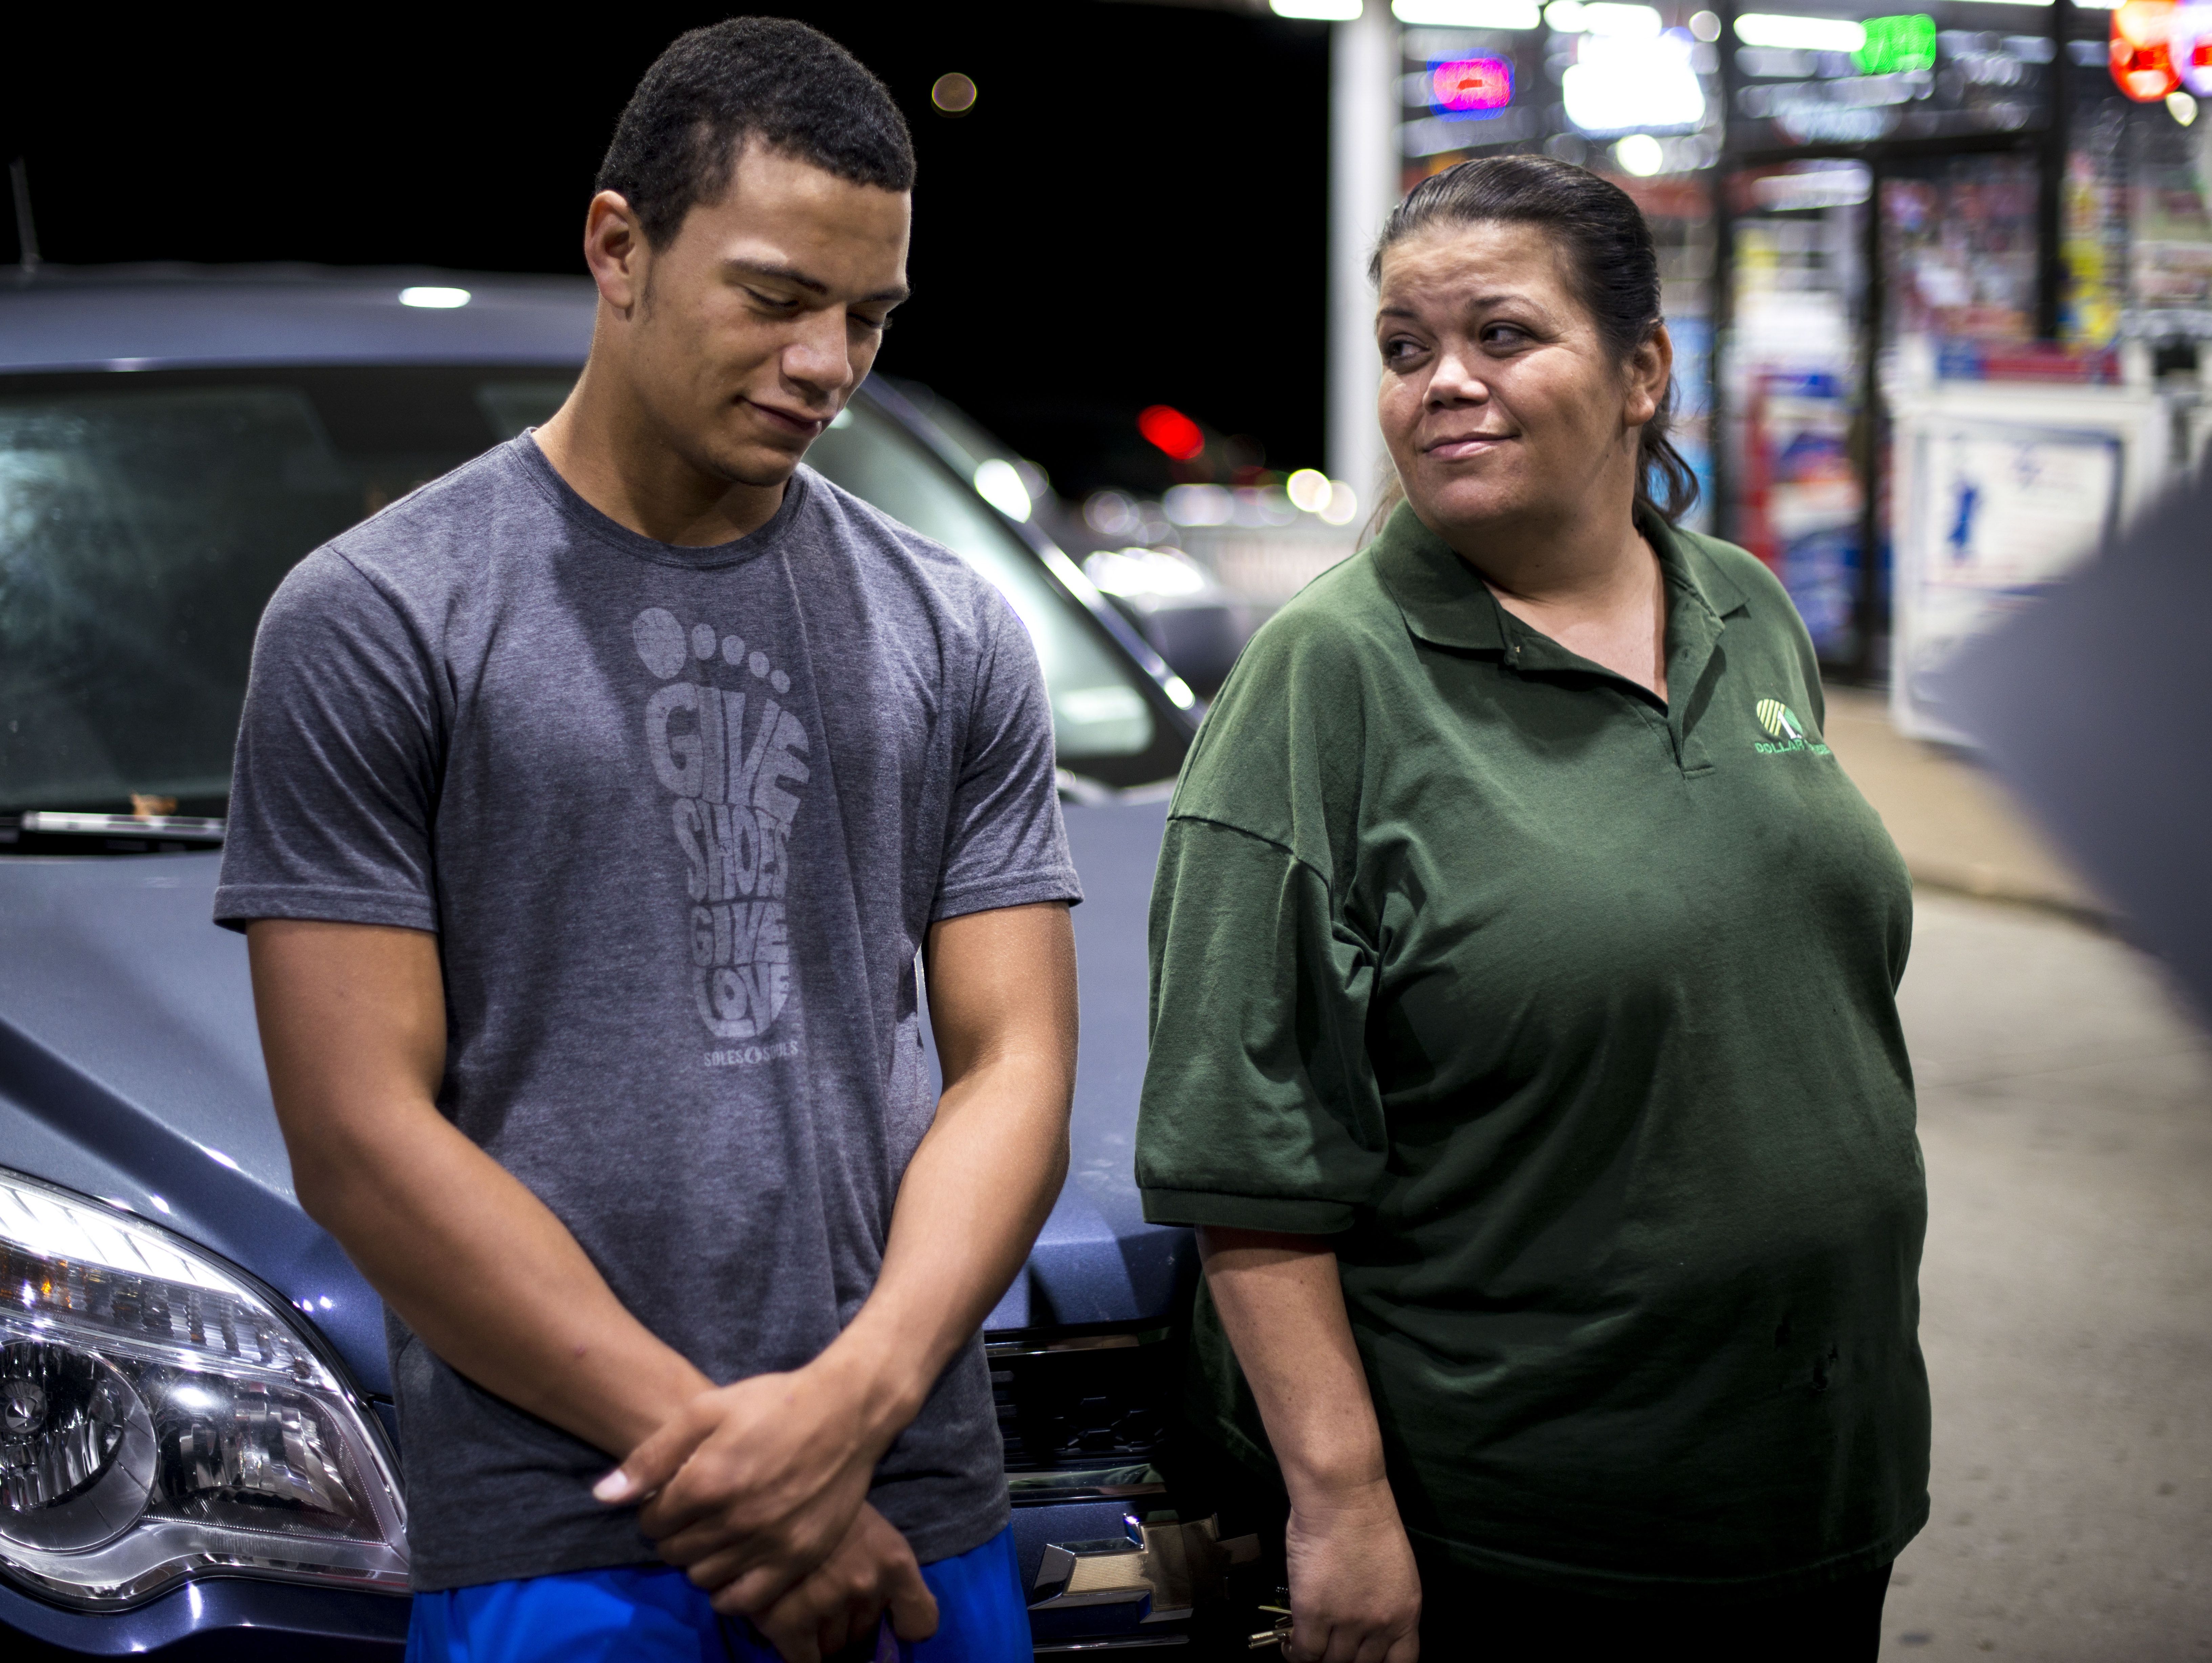 Shawn Murphy speaks with his mother Kim Murphy, who came to pick him up from a gas station after his car broke down on his way home from football practice, Tuesday, Oct. 25, 2016, in Nashville, Tenn.